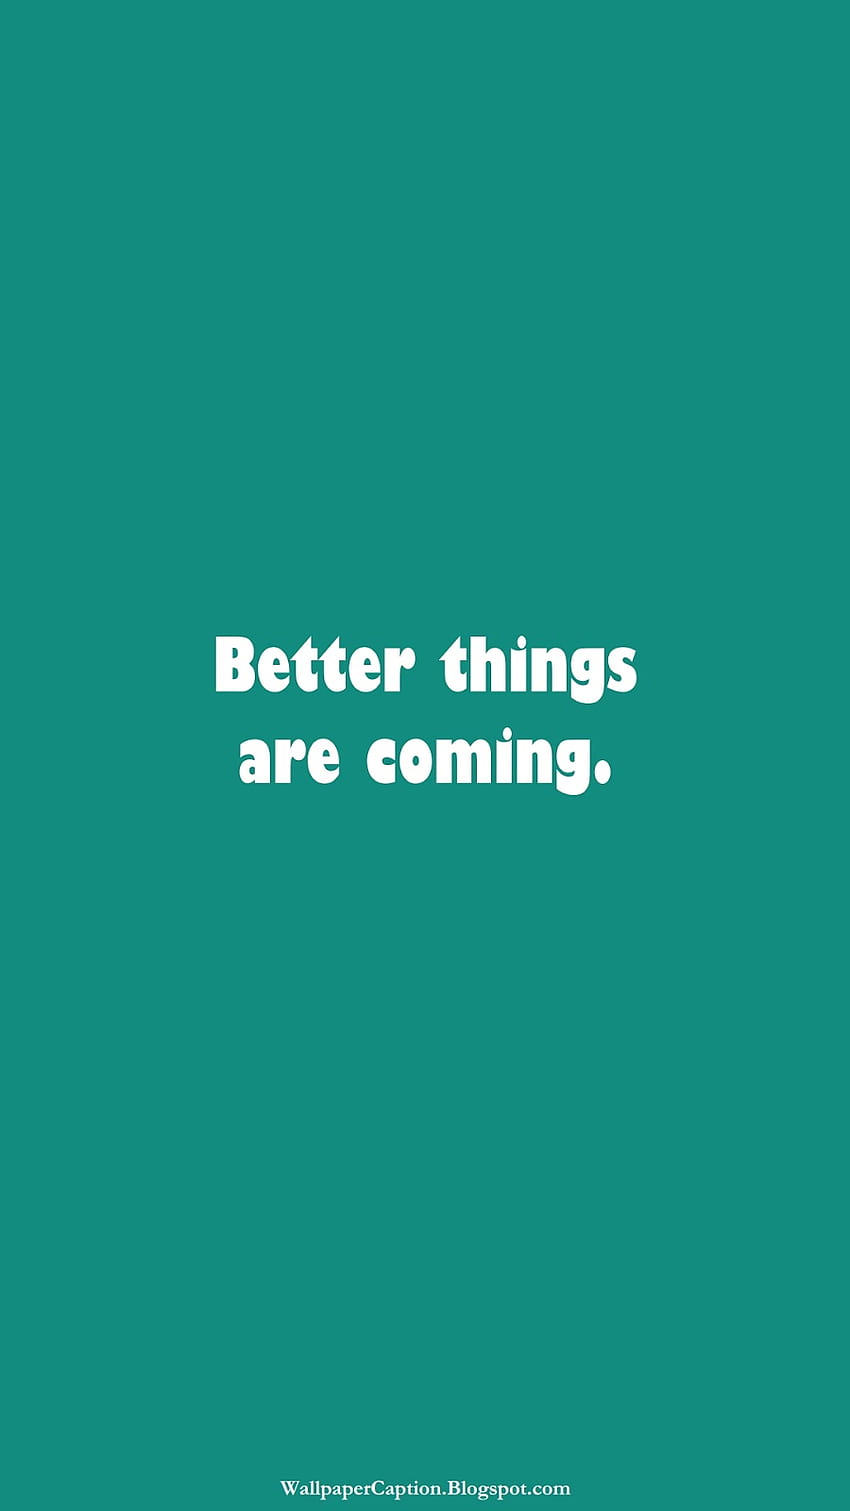 Phone with Short Quotes (Part 13.6 Teal Green WhatsApp) - Caption, Good Things Are Coming HD phone wallpaper